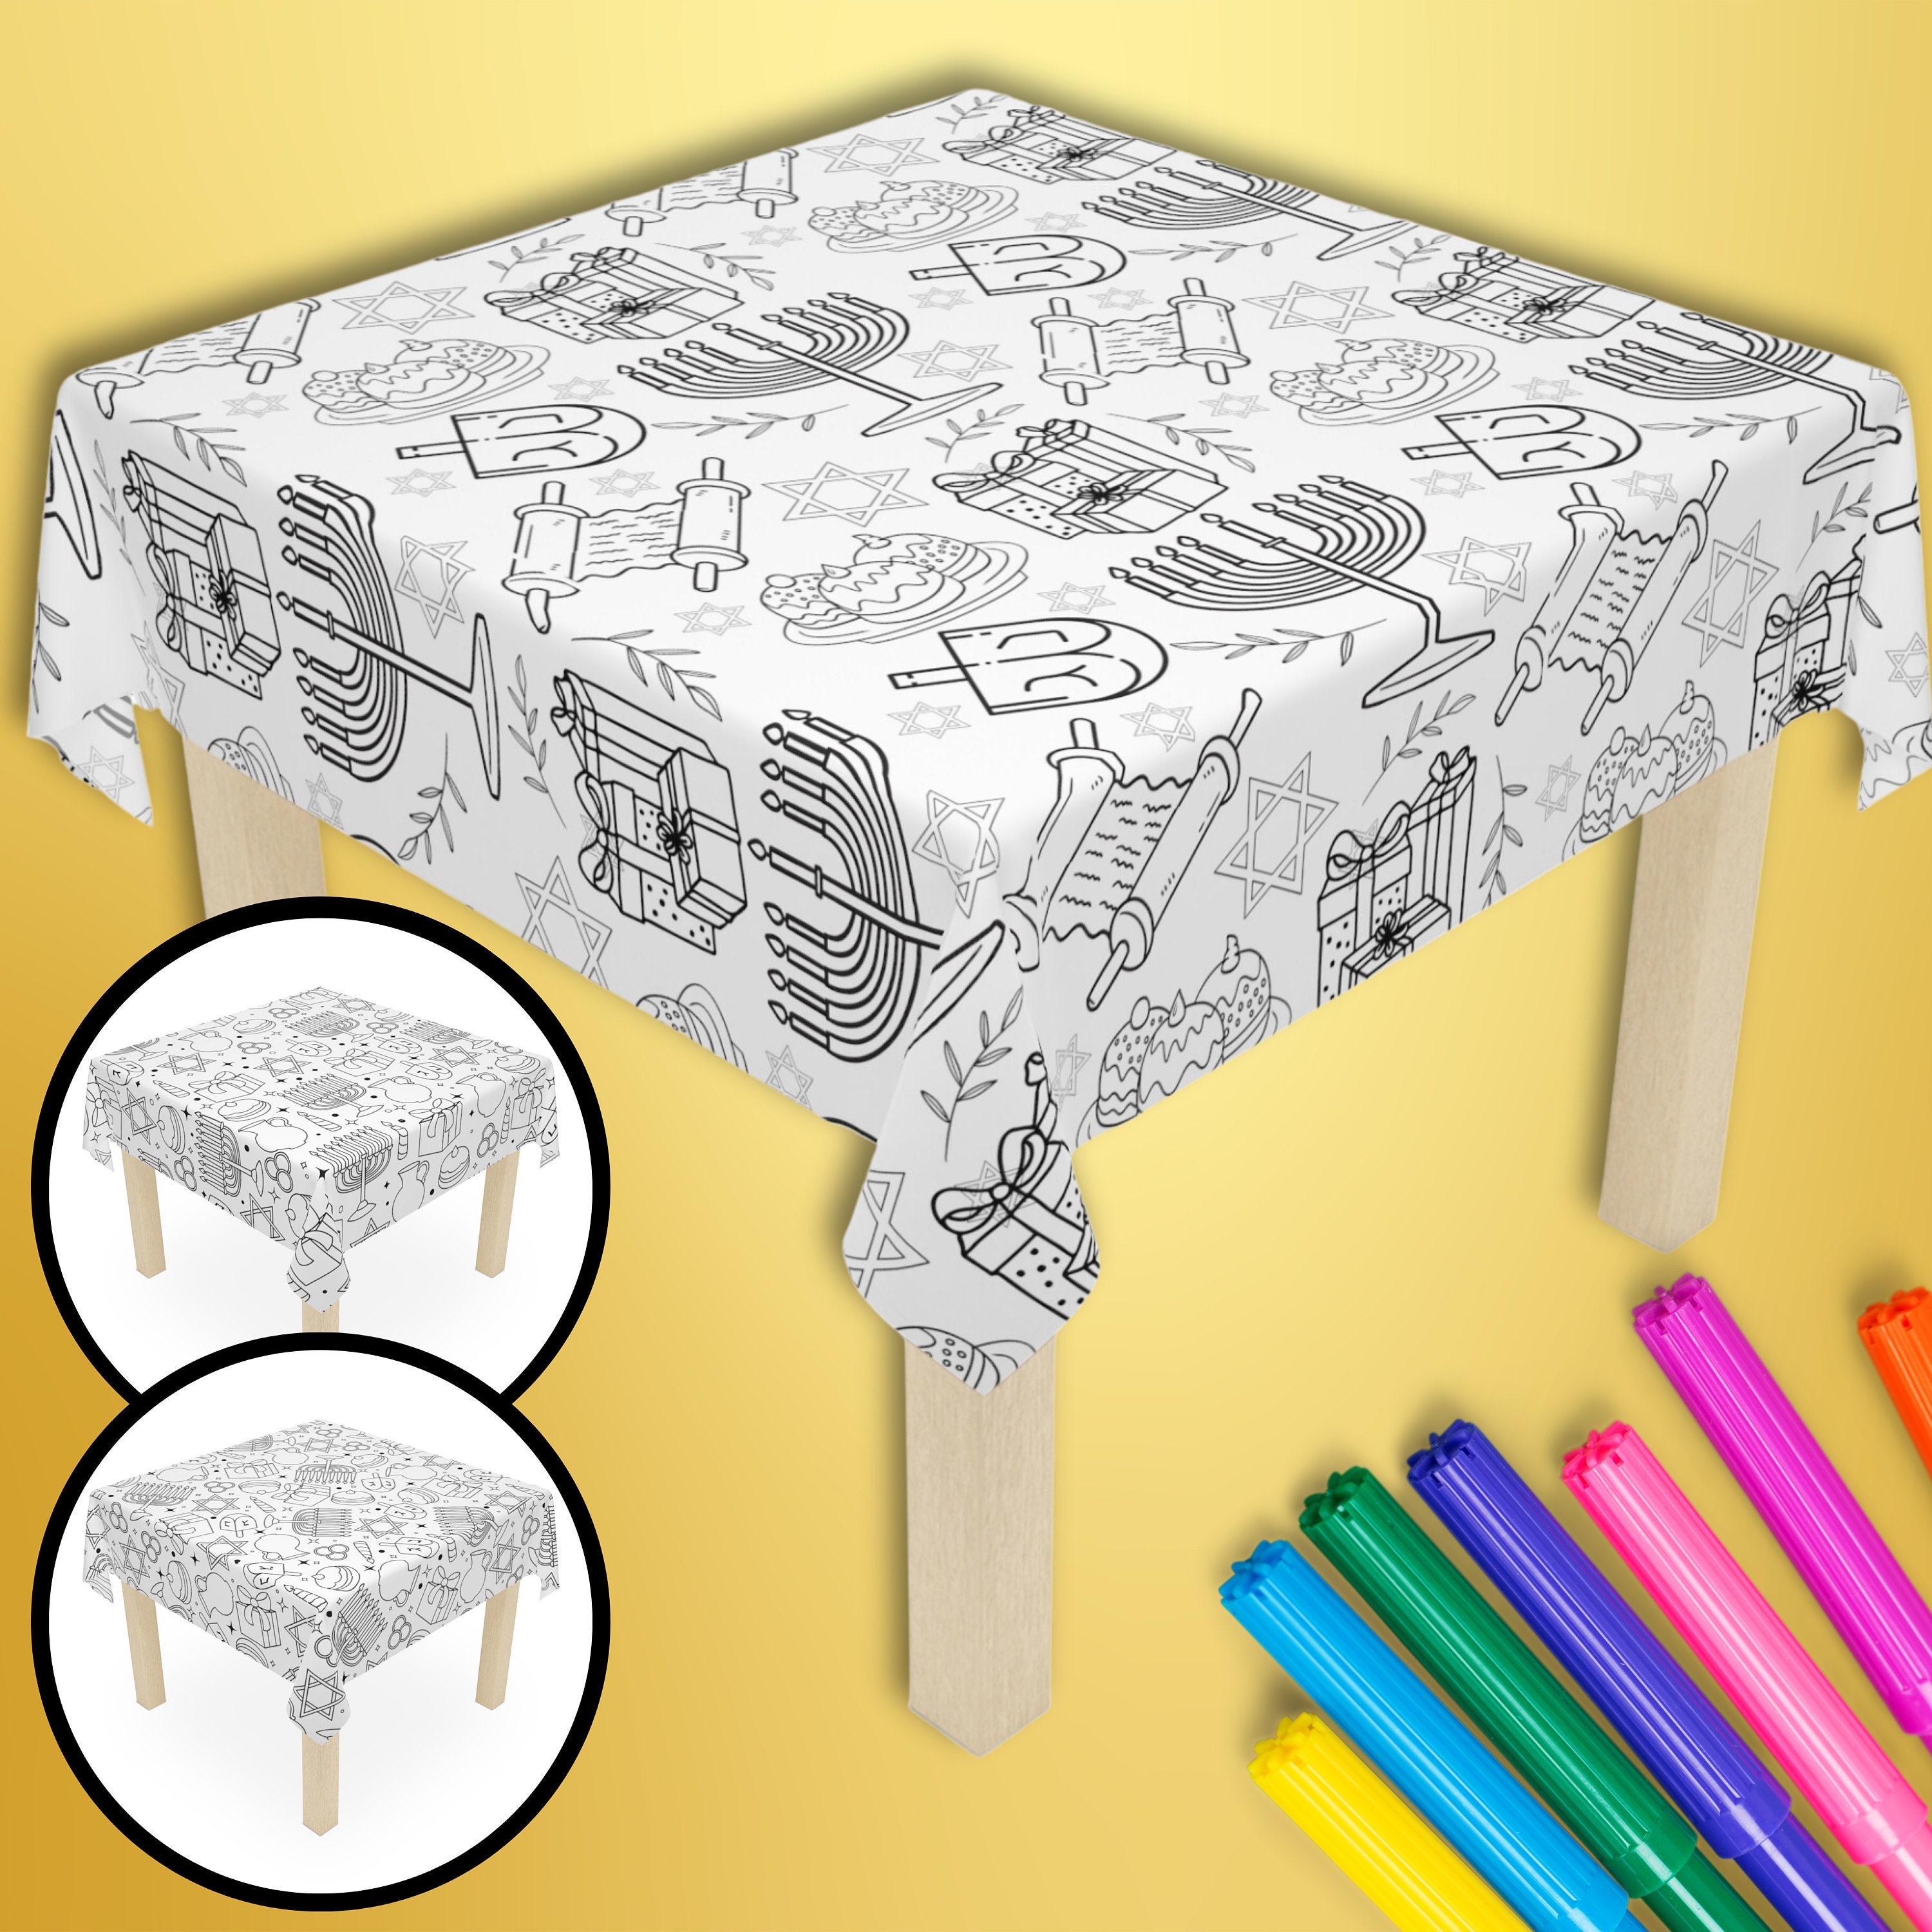 Color Your Own Hanukkah Tablecloth, Jewish Holiday Craft, Chanukah Party  Coloring in Activity for Kids, Washable Tablewear 